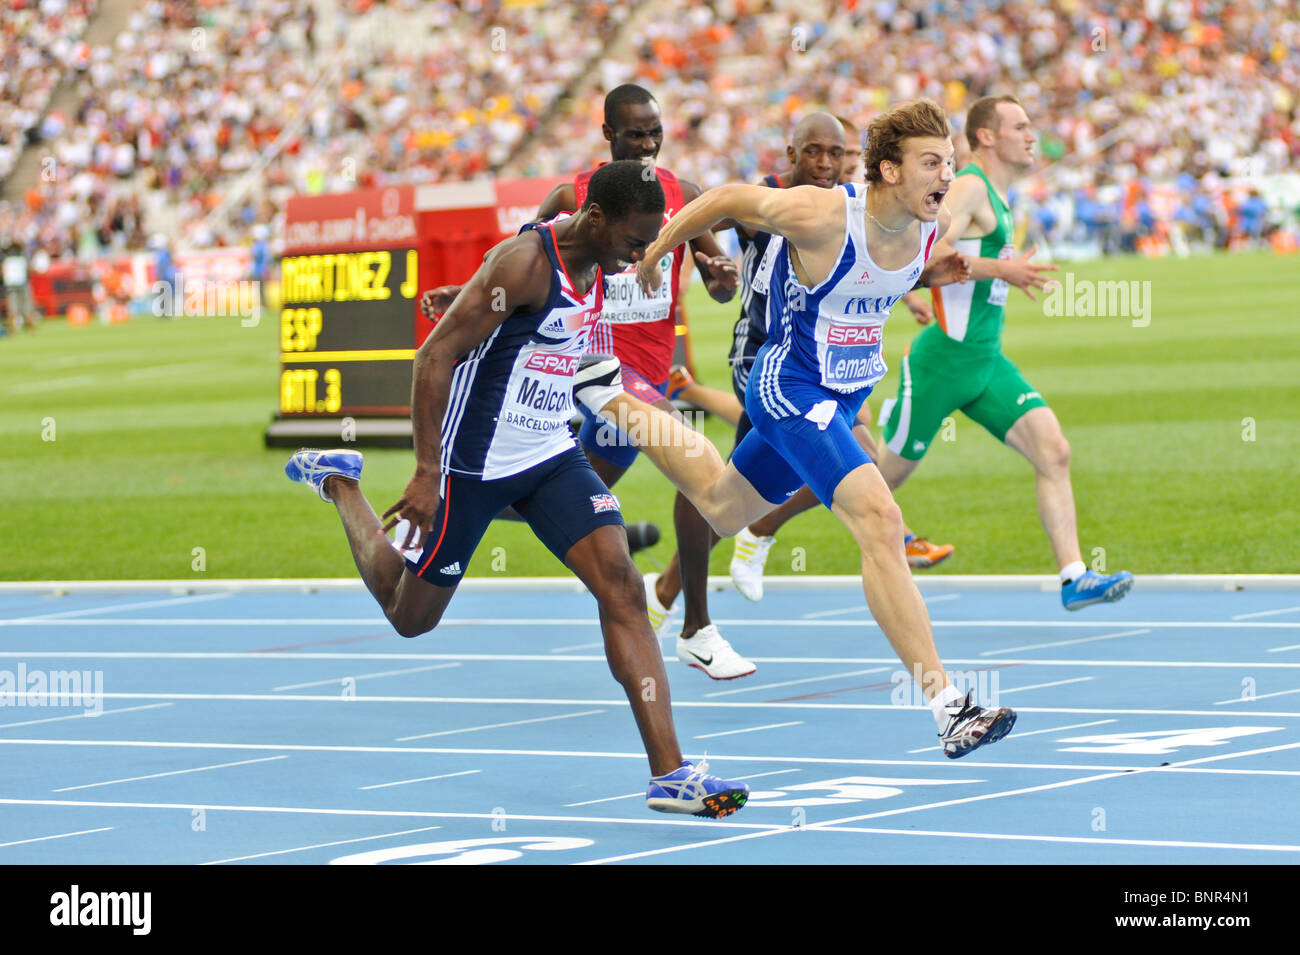 BARCELONA Aug 1st 2010: French athlete Christophe Lemaitre in his 100m victory. Stock Photo